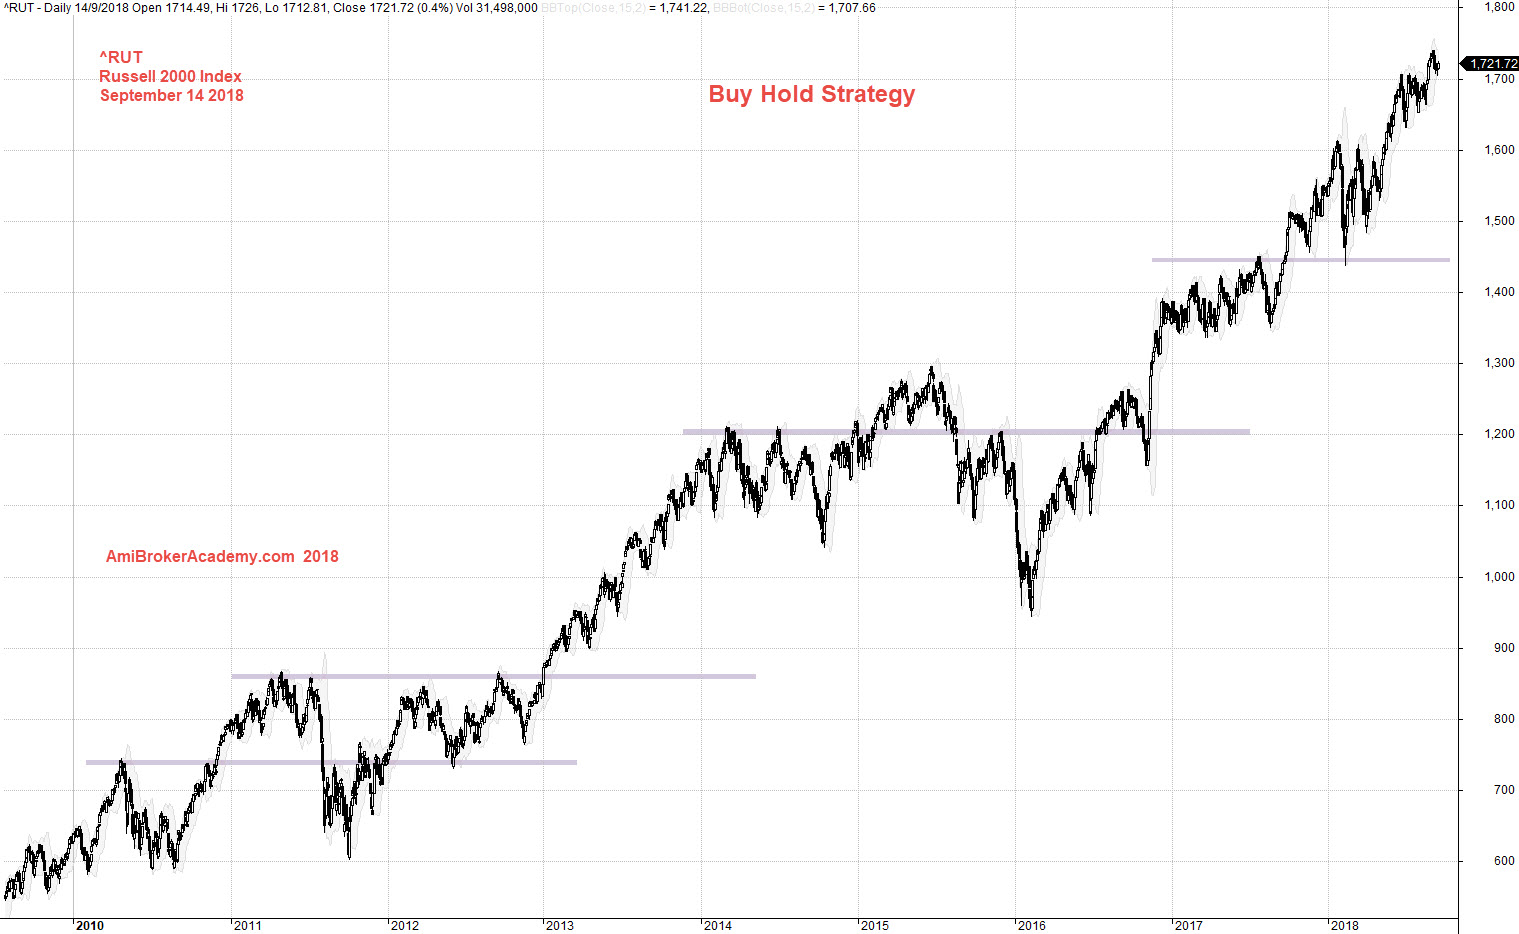 ^RUT Russell 2000 Index Charting